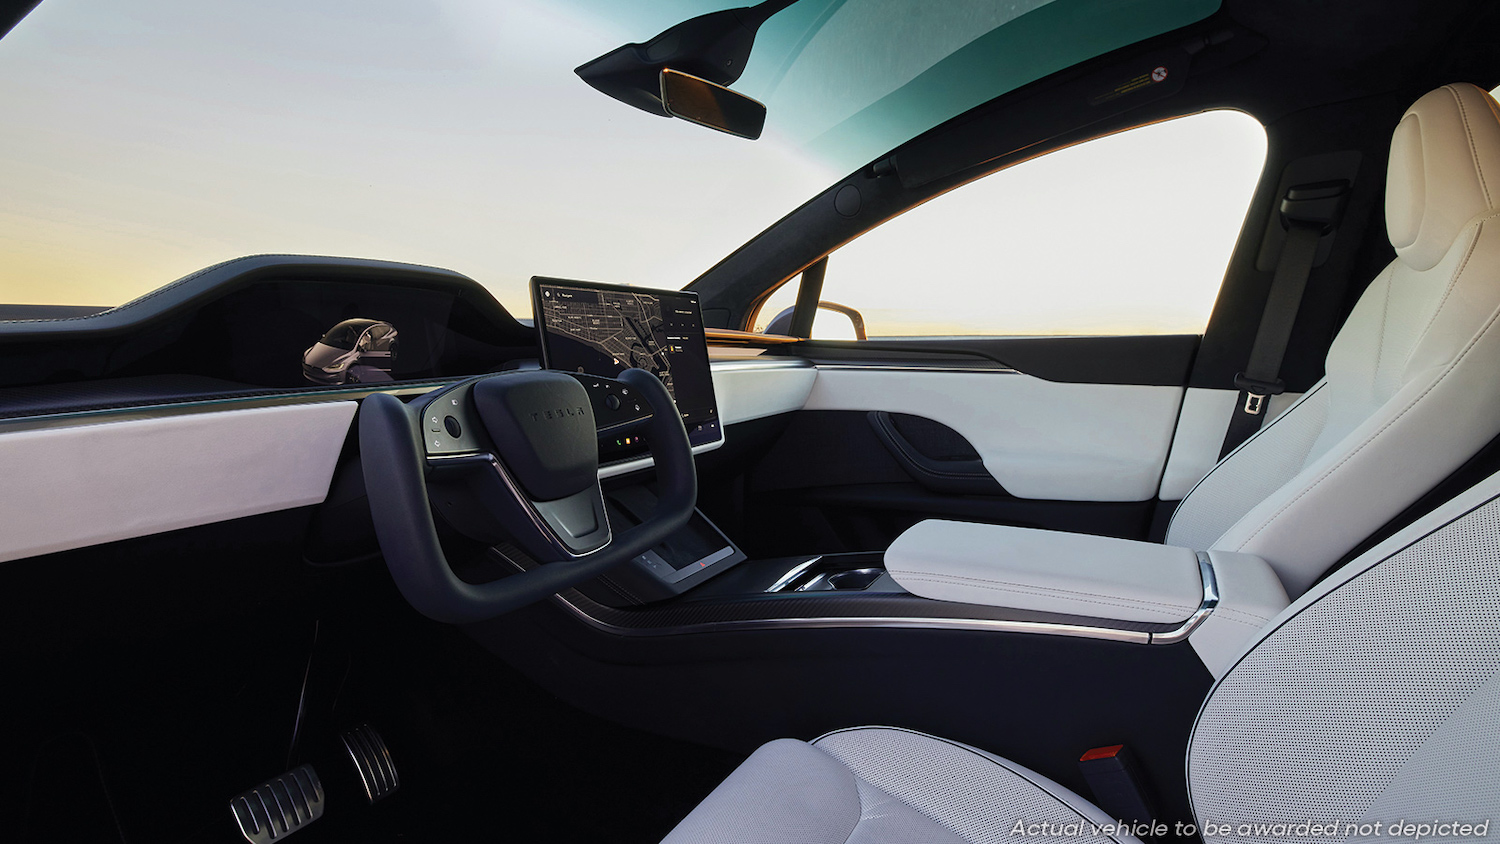 The interior of a Tesla Model X Plaid, with a yoke steering wheel and large infotainment screen